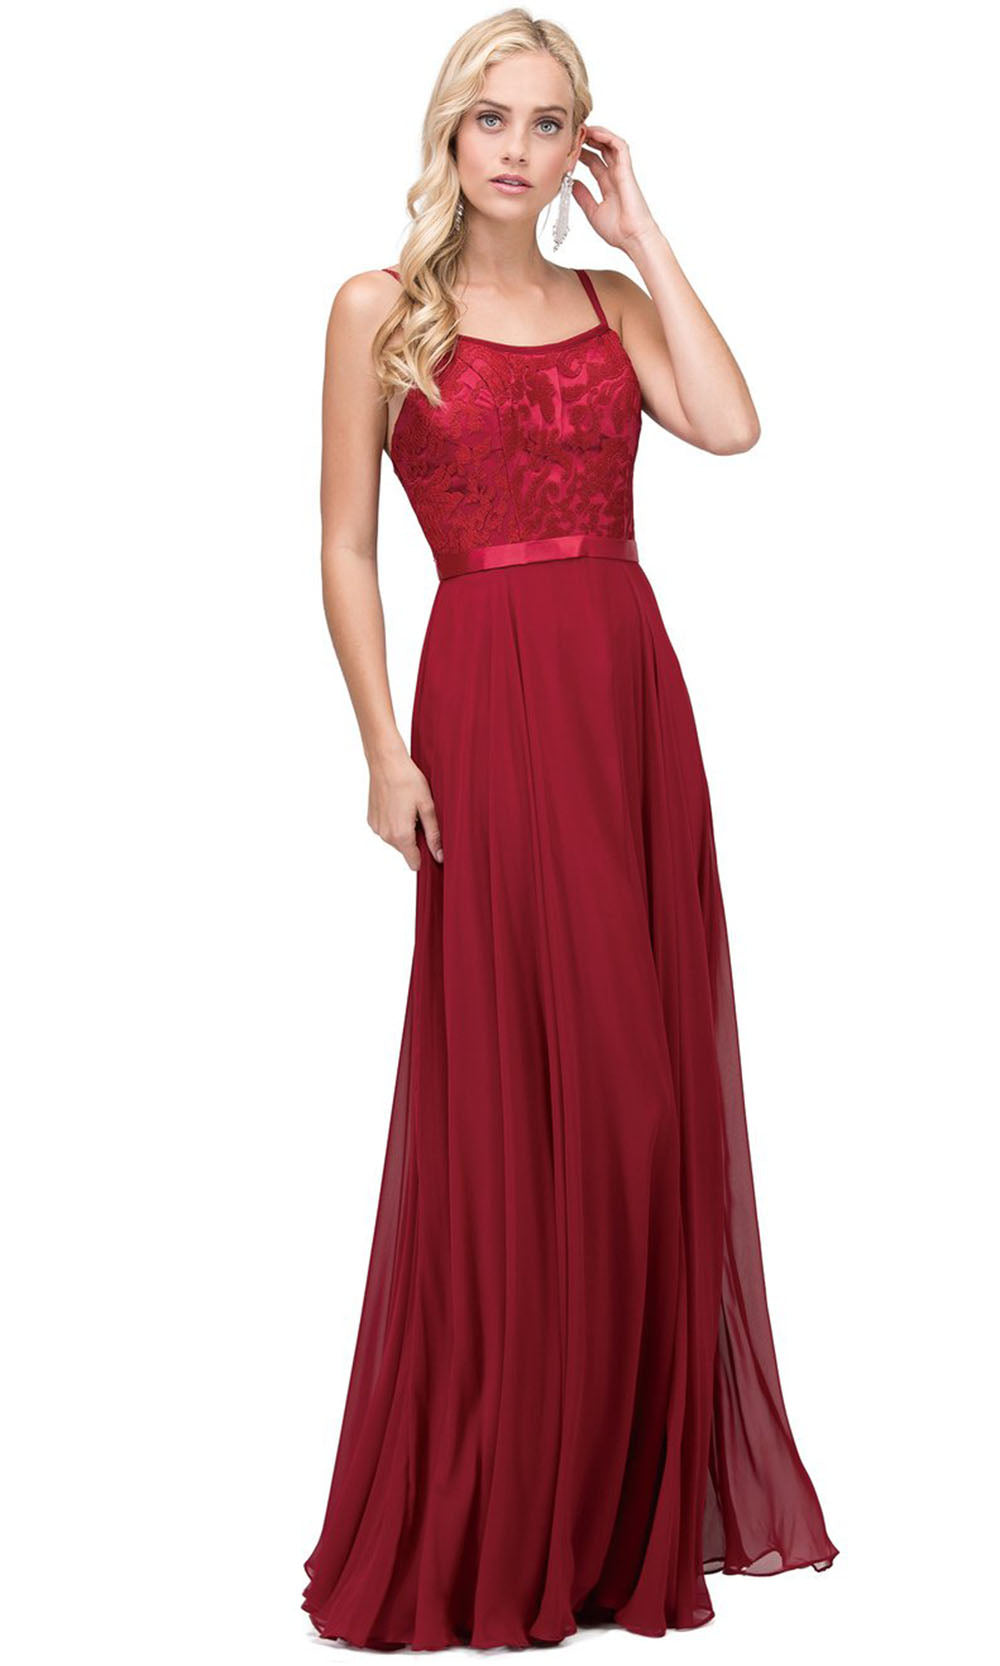 Dancing Queen - 9914 Embroidered Scoop Neck Long A-Line Dress In Red